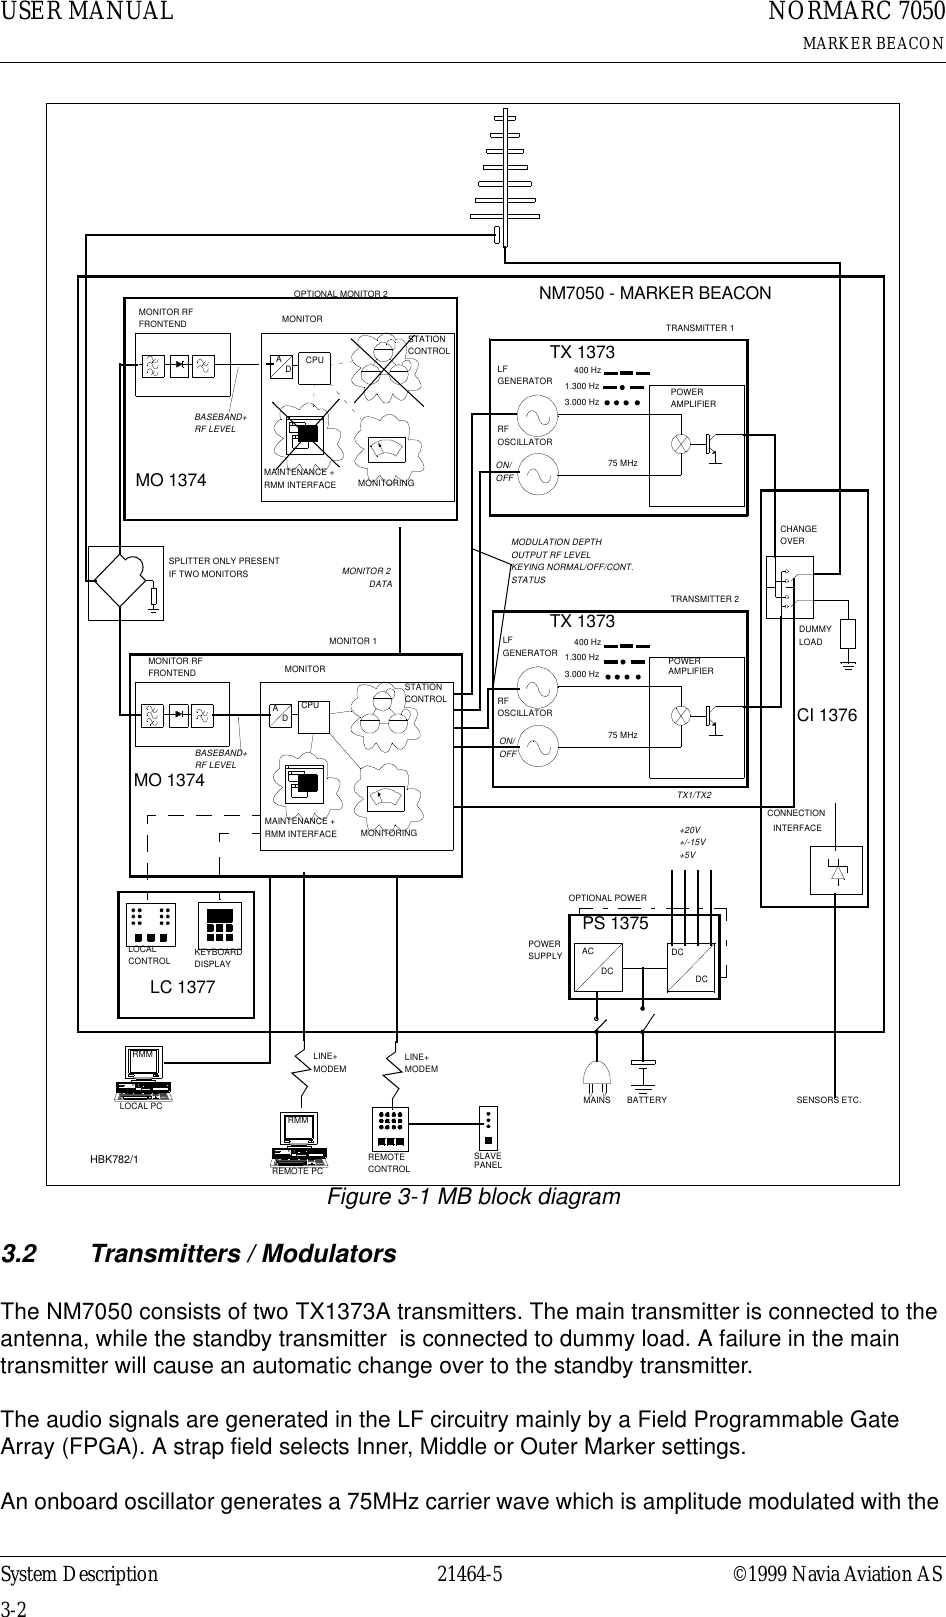 USER MANUAL3-221464-5NORMARC 7050MARKER BEACONSystem Description ©1999 Navia Aviation ASFigure 3-1 MB block diagram3.2 Transmitters / ModulatorsThe NM7050 consists of two TX1373A transmitters. The main transmitter is connected to the antenna, while the standby transmitter  is connected to dummy load. A failure in the main transmitter will cause an automatic change over to the standby transmitter.The audio signals are generated in the LF circuitry mainly by a Field Programmable Gate Array (FPGA). A strap field selects Inner, Middle or Outer Marker settings.An onboard oscillator generates a 75MHz carrier wave which is amplitude modulated with the LF GENERATORRF OSCILLATORPOWERAMPLIFIERCHANGEOVERLOCALCONTROLTX1/TX2ON/OFF75 MHz400 Hz1.300 Hz3.000 HzKEYBOARDDISPLAYADCPUNM7050 - MARKER BEACONSTATIONCONTROLADCPUMONITORINGMAINTENANCE +RMM INTERFACEMONITOR RFFRONTEND MONITORBASEBAND+RF LEVELOPTIONAL MONITOR 2 REMOTECONTROLSLAVEPANELLOCAL PCREMOTE PCRMMPOWERSUPPLYCONNECTIONINTERFACETRANSMITTER 1  TRANSMITTER 2 MONITOR RFFRONTEND MONITORACDCDCDCLINE+MODEMMONITOR 1 OPTIONAL POWERMO 1374MO 1374TX 1373LC 1377CI 1376PS 1375DUMMYLOADMAINS BATTERY SENSORS ETC.BASEBAND+RF LEVELMAINTENANCE +RMM INTERFACE MONITORINGSTATIONCONTROLSPLITTER ONLY PRESENT IF TWO MONITORSLF GENERATORRF OSCILLATORPOWERAMPLIFIER75 MHz400 Hz1.300 Hz3.000 HzTX 1373ON/OFFMODULATION DEPTHOUTPUT RF LEVELKEYING NORMAL/OFF/CONT.STATUS+20V+/-15V+5VMONITOR 2DATALINE+MODEMHBK782/1RMM